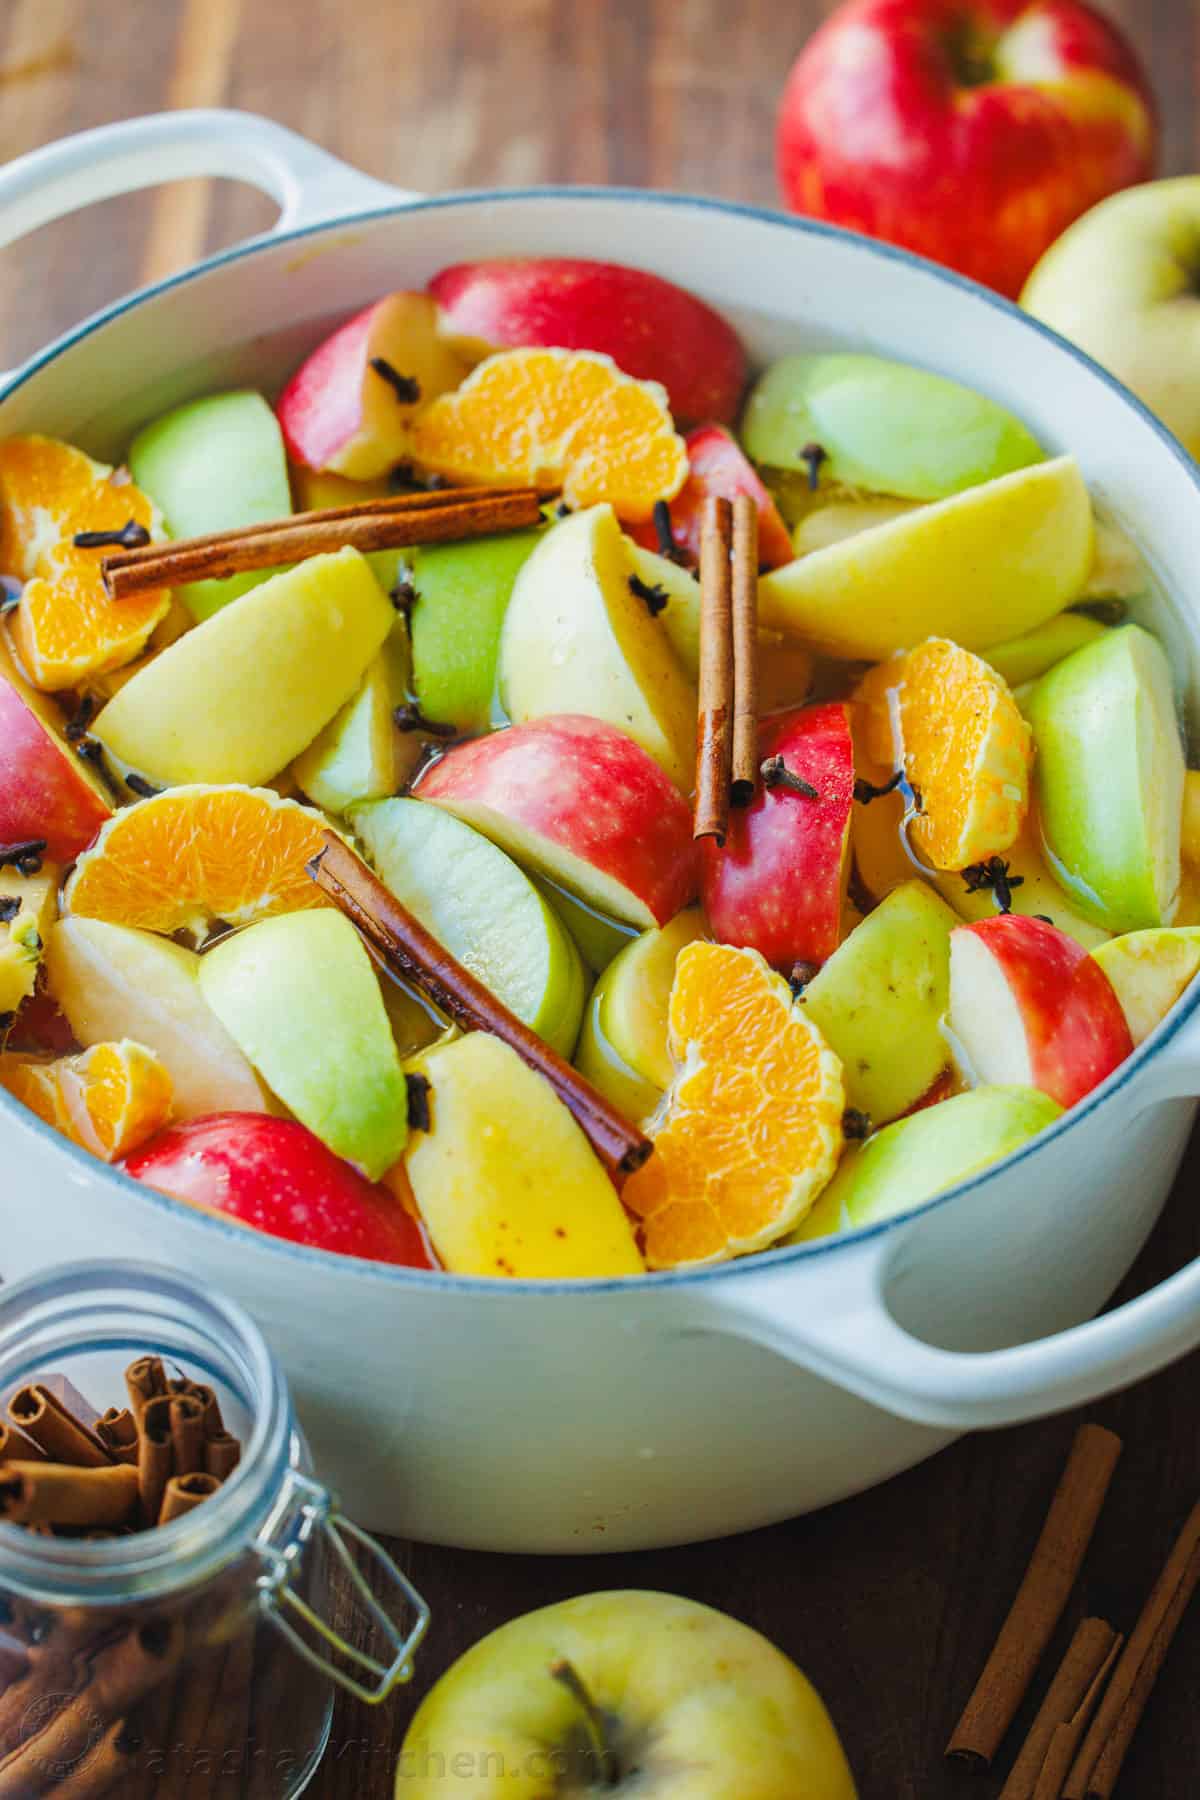 Apple cider ingredients in a pot ready to simmer on the stove. Colorful apples, cinnamon, oranges, cloves, sugar